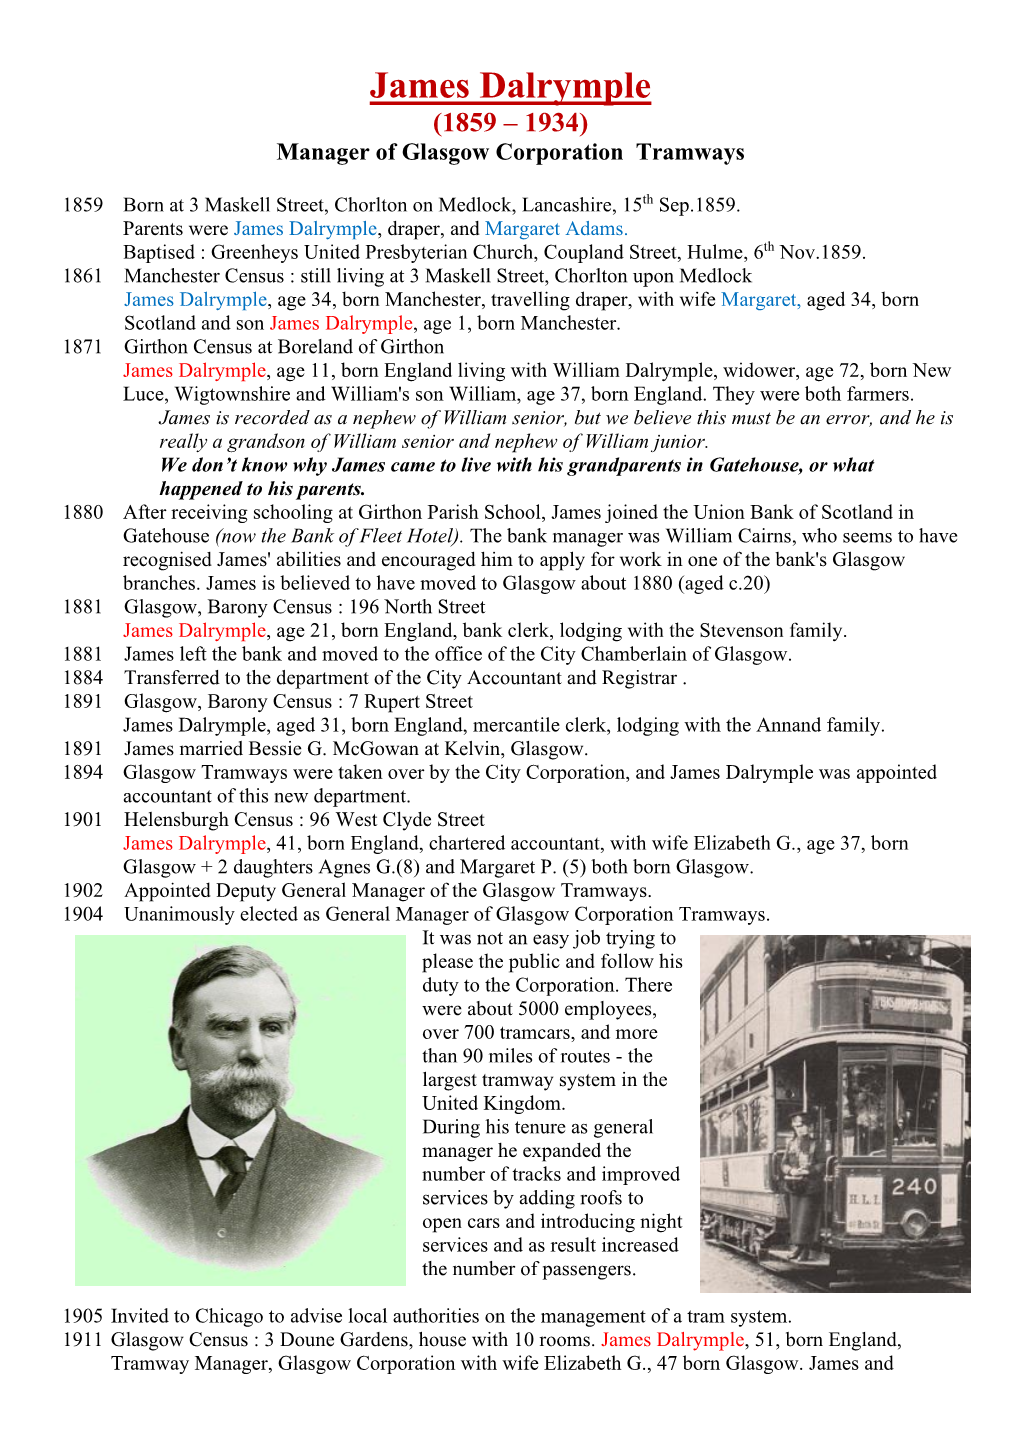 James Dalrymple (1859 – 1934) Manager of Glasgow Corporation Tramways